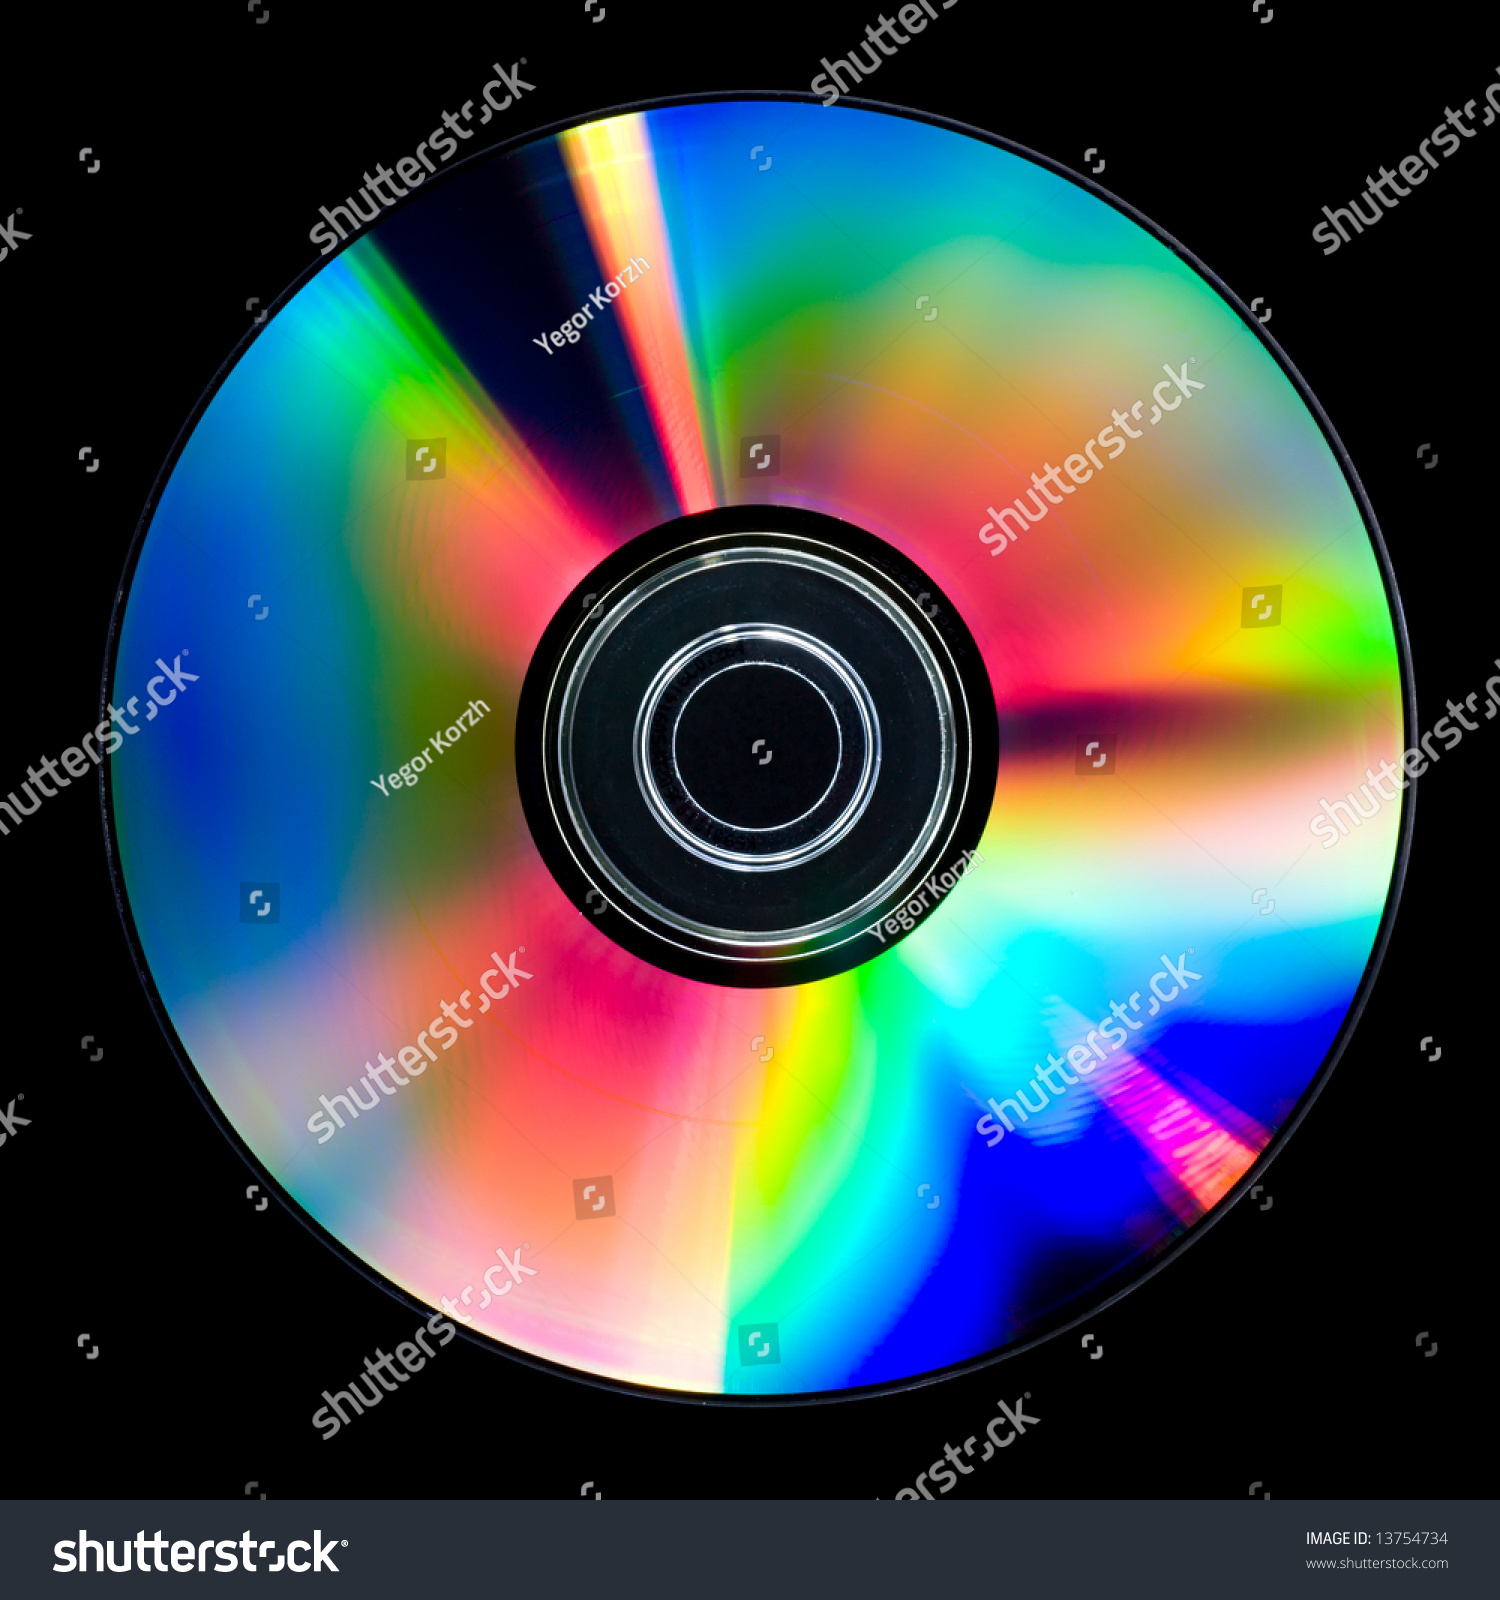 Colourful Cd Disk Isolated Over Black Stock Photo 13754734 ...